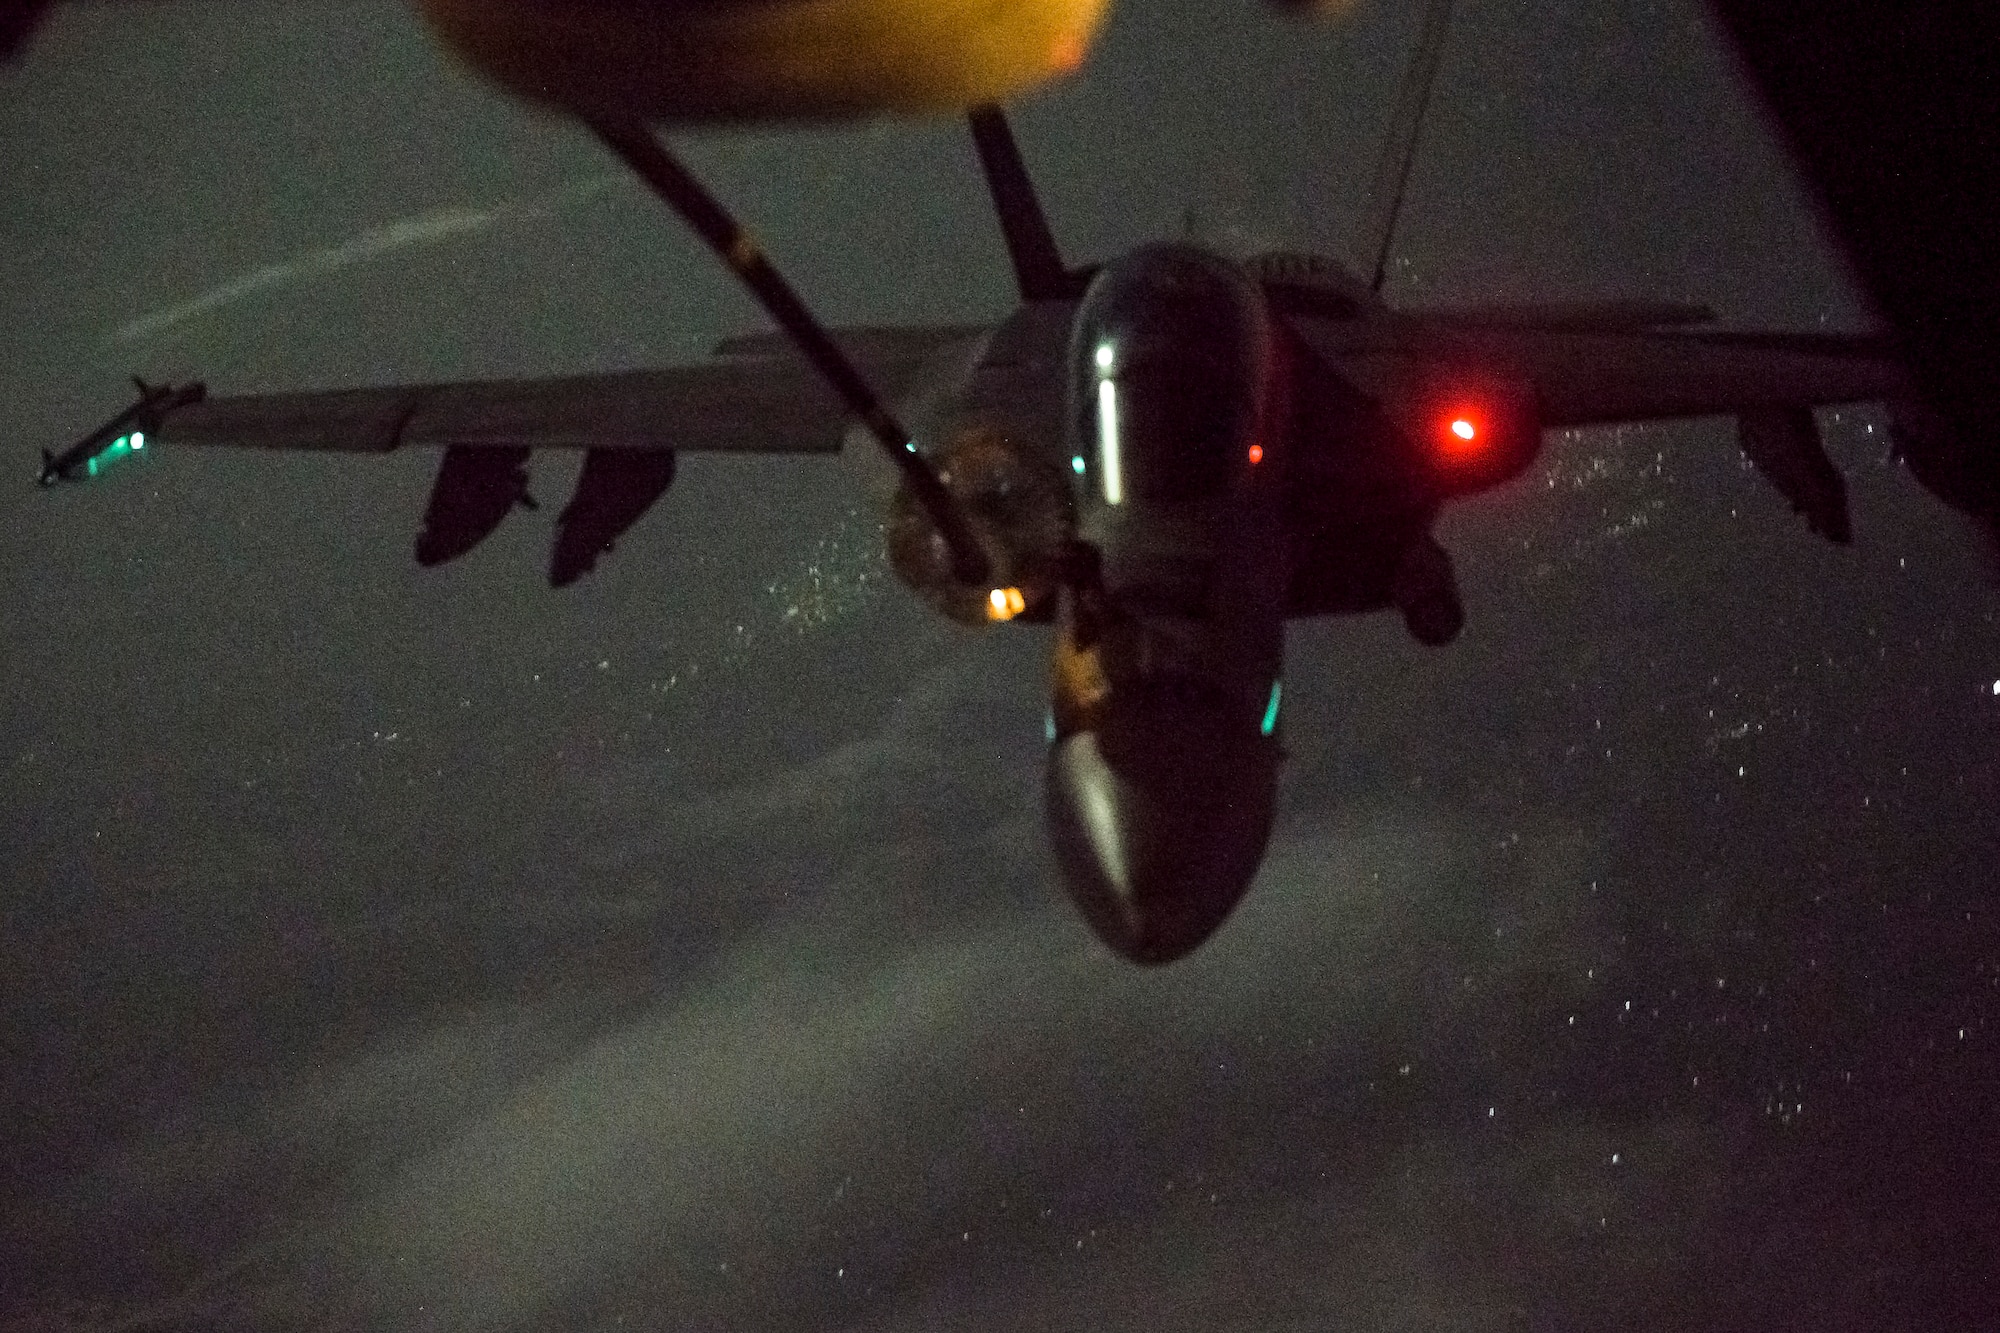 F/A-18 Hornet aircraft approaches a KC-10 Extender aircraft over Afghanistan to receive fuel